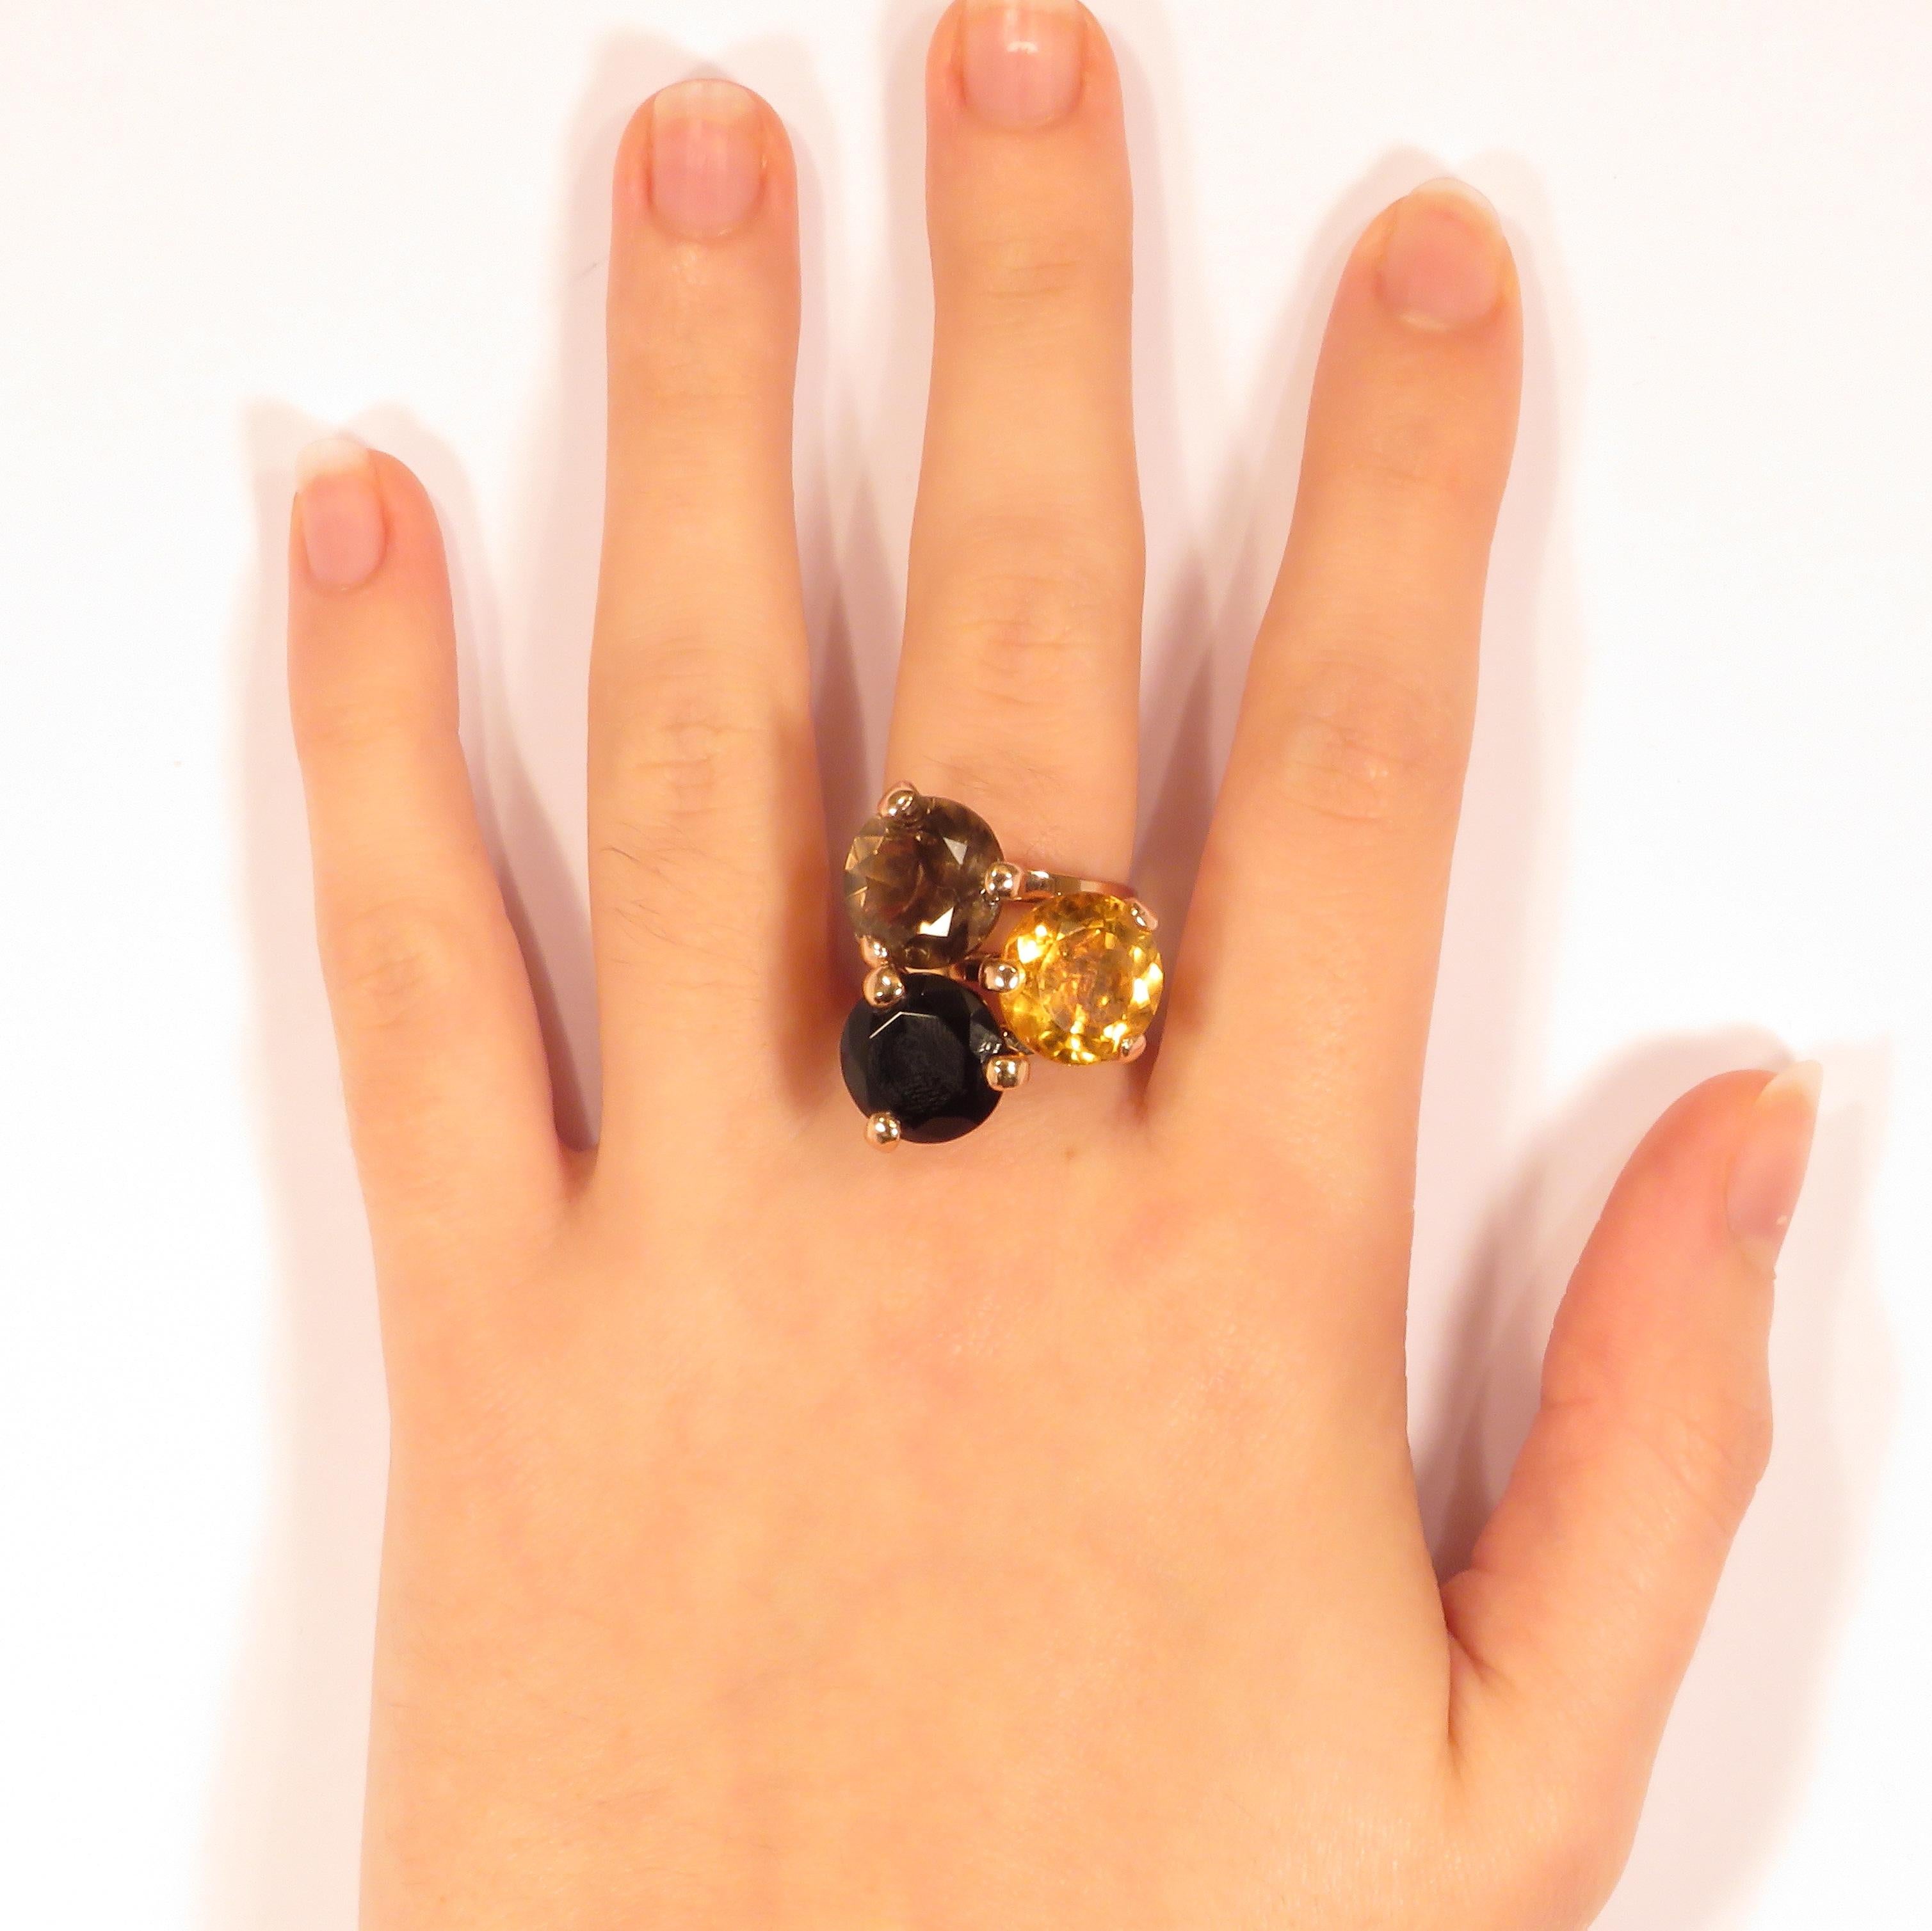 9 karat rose gold ring with natural brilliant cut onyx, yellow and brown topaz. Handcrafted in Italy by Botta Gioielli. The stone size is 12 millimeters / 0.472 inches. US finger size: Us 6 1/2 , Italian: 13, French: 53, it can be resized before